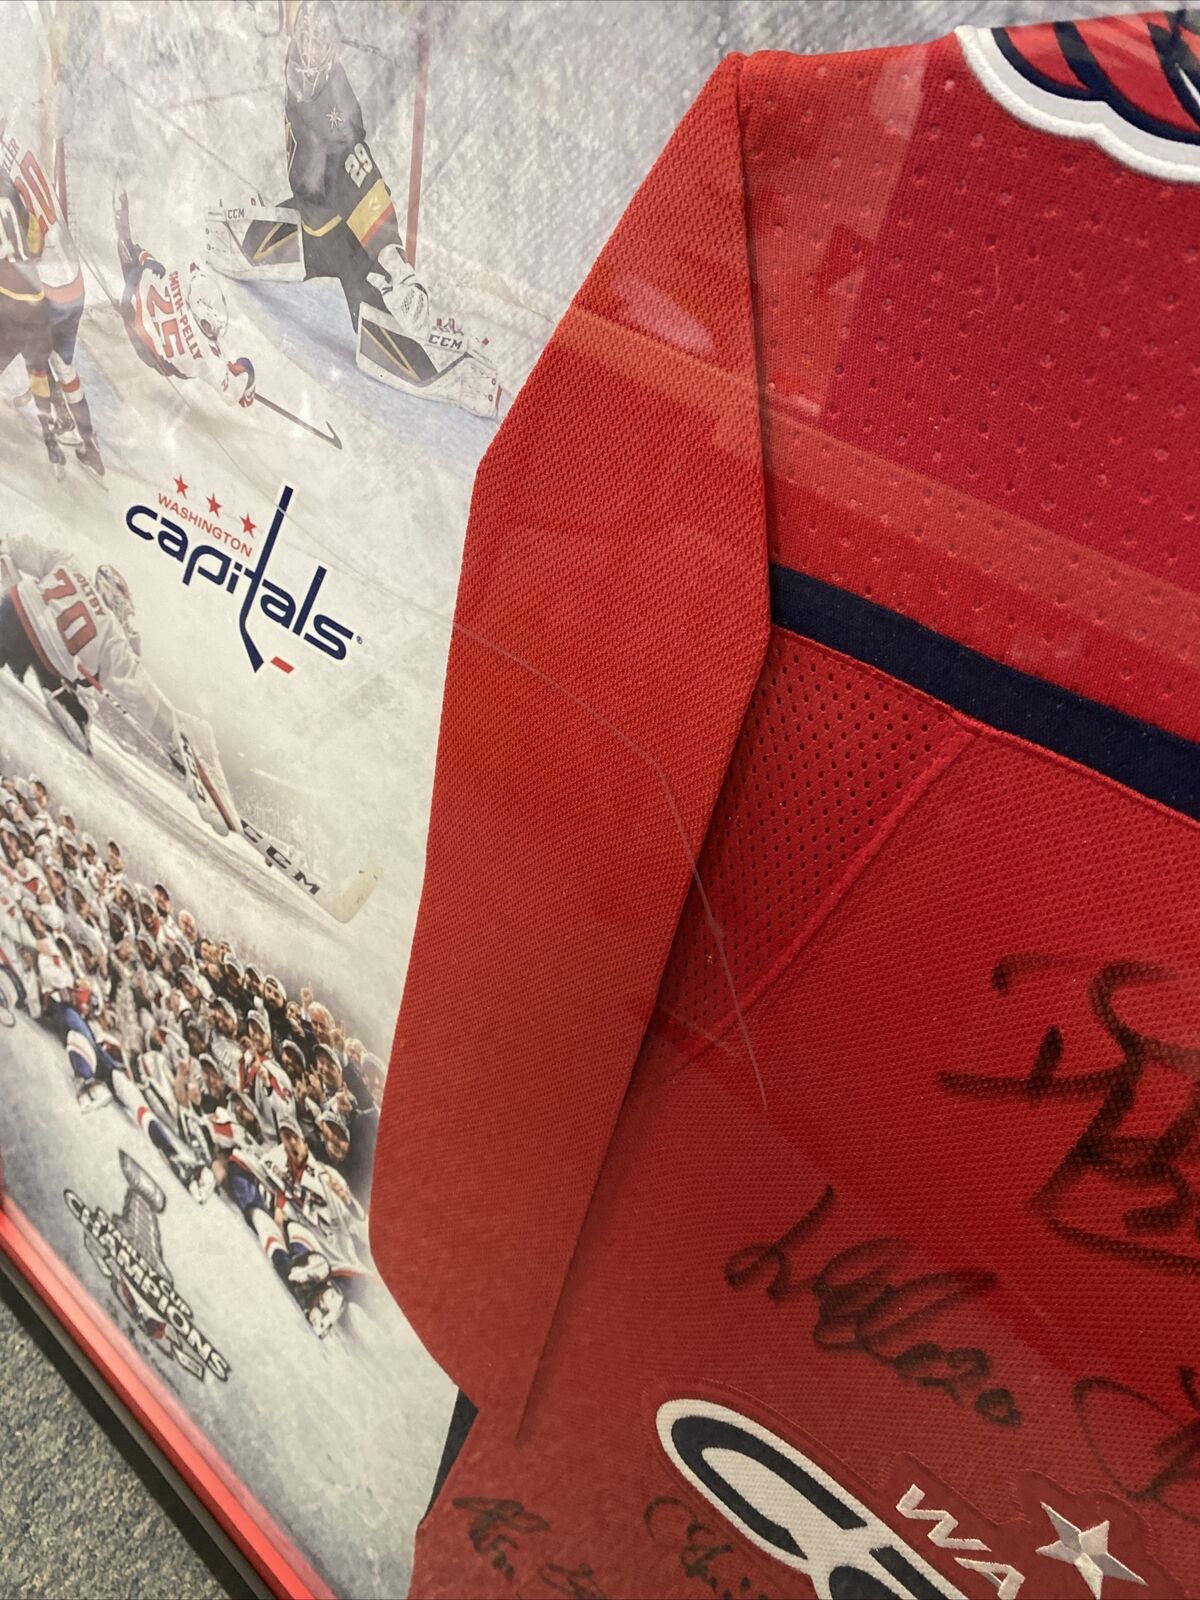 Braden Holtby Washington Capitals 2018 Stanley Cup Champions Autographed  Red Adidas Authentic Jersey with 2018 Stanley Cup Final Patch & Multiple  Inscriptions - #70 in a L.E. of 70 - NHL Auctions